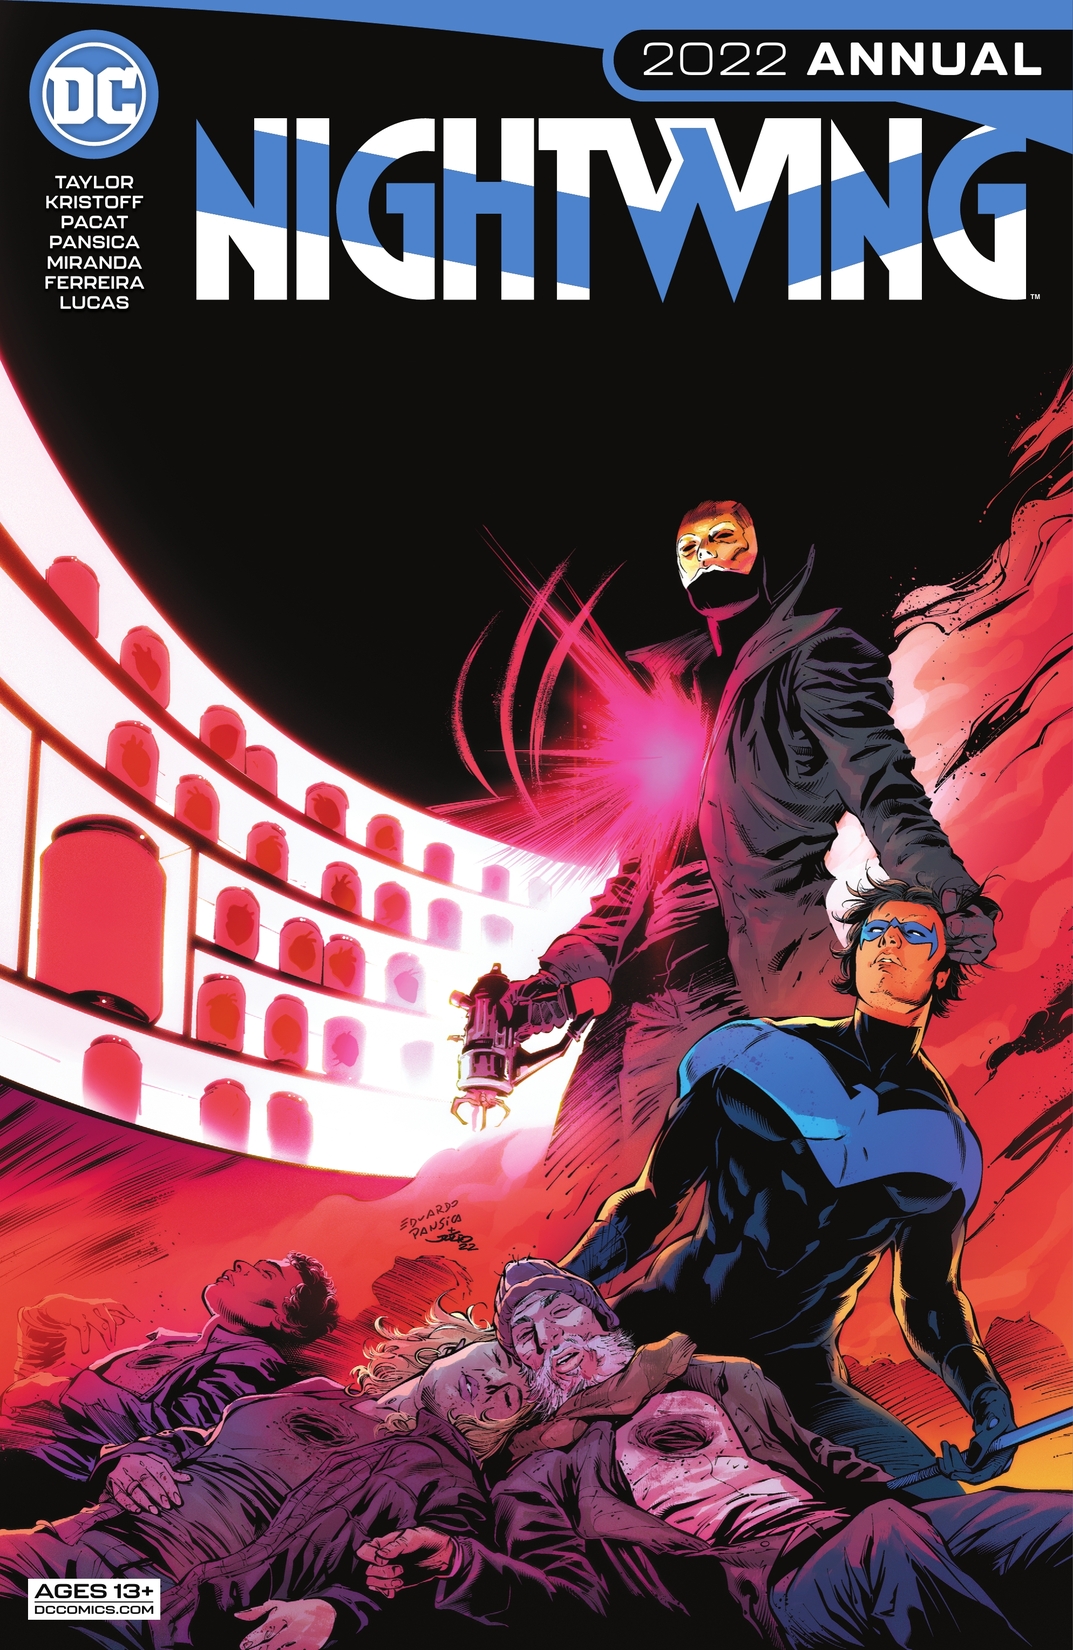 Nightwing 2022 Annual (2022) #1 preview images